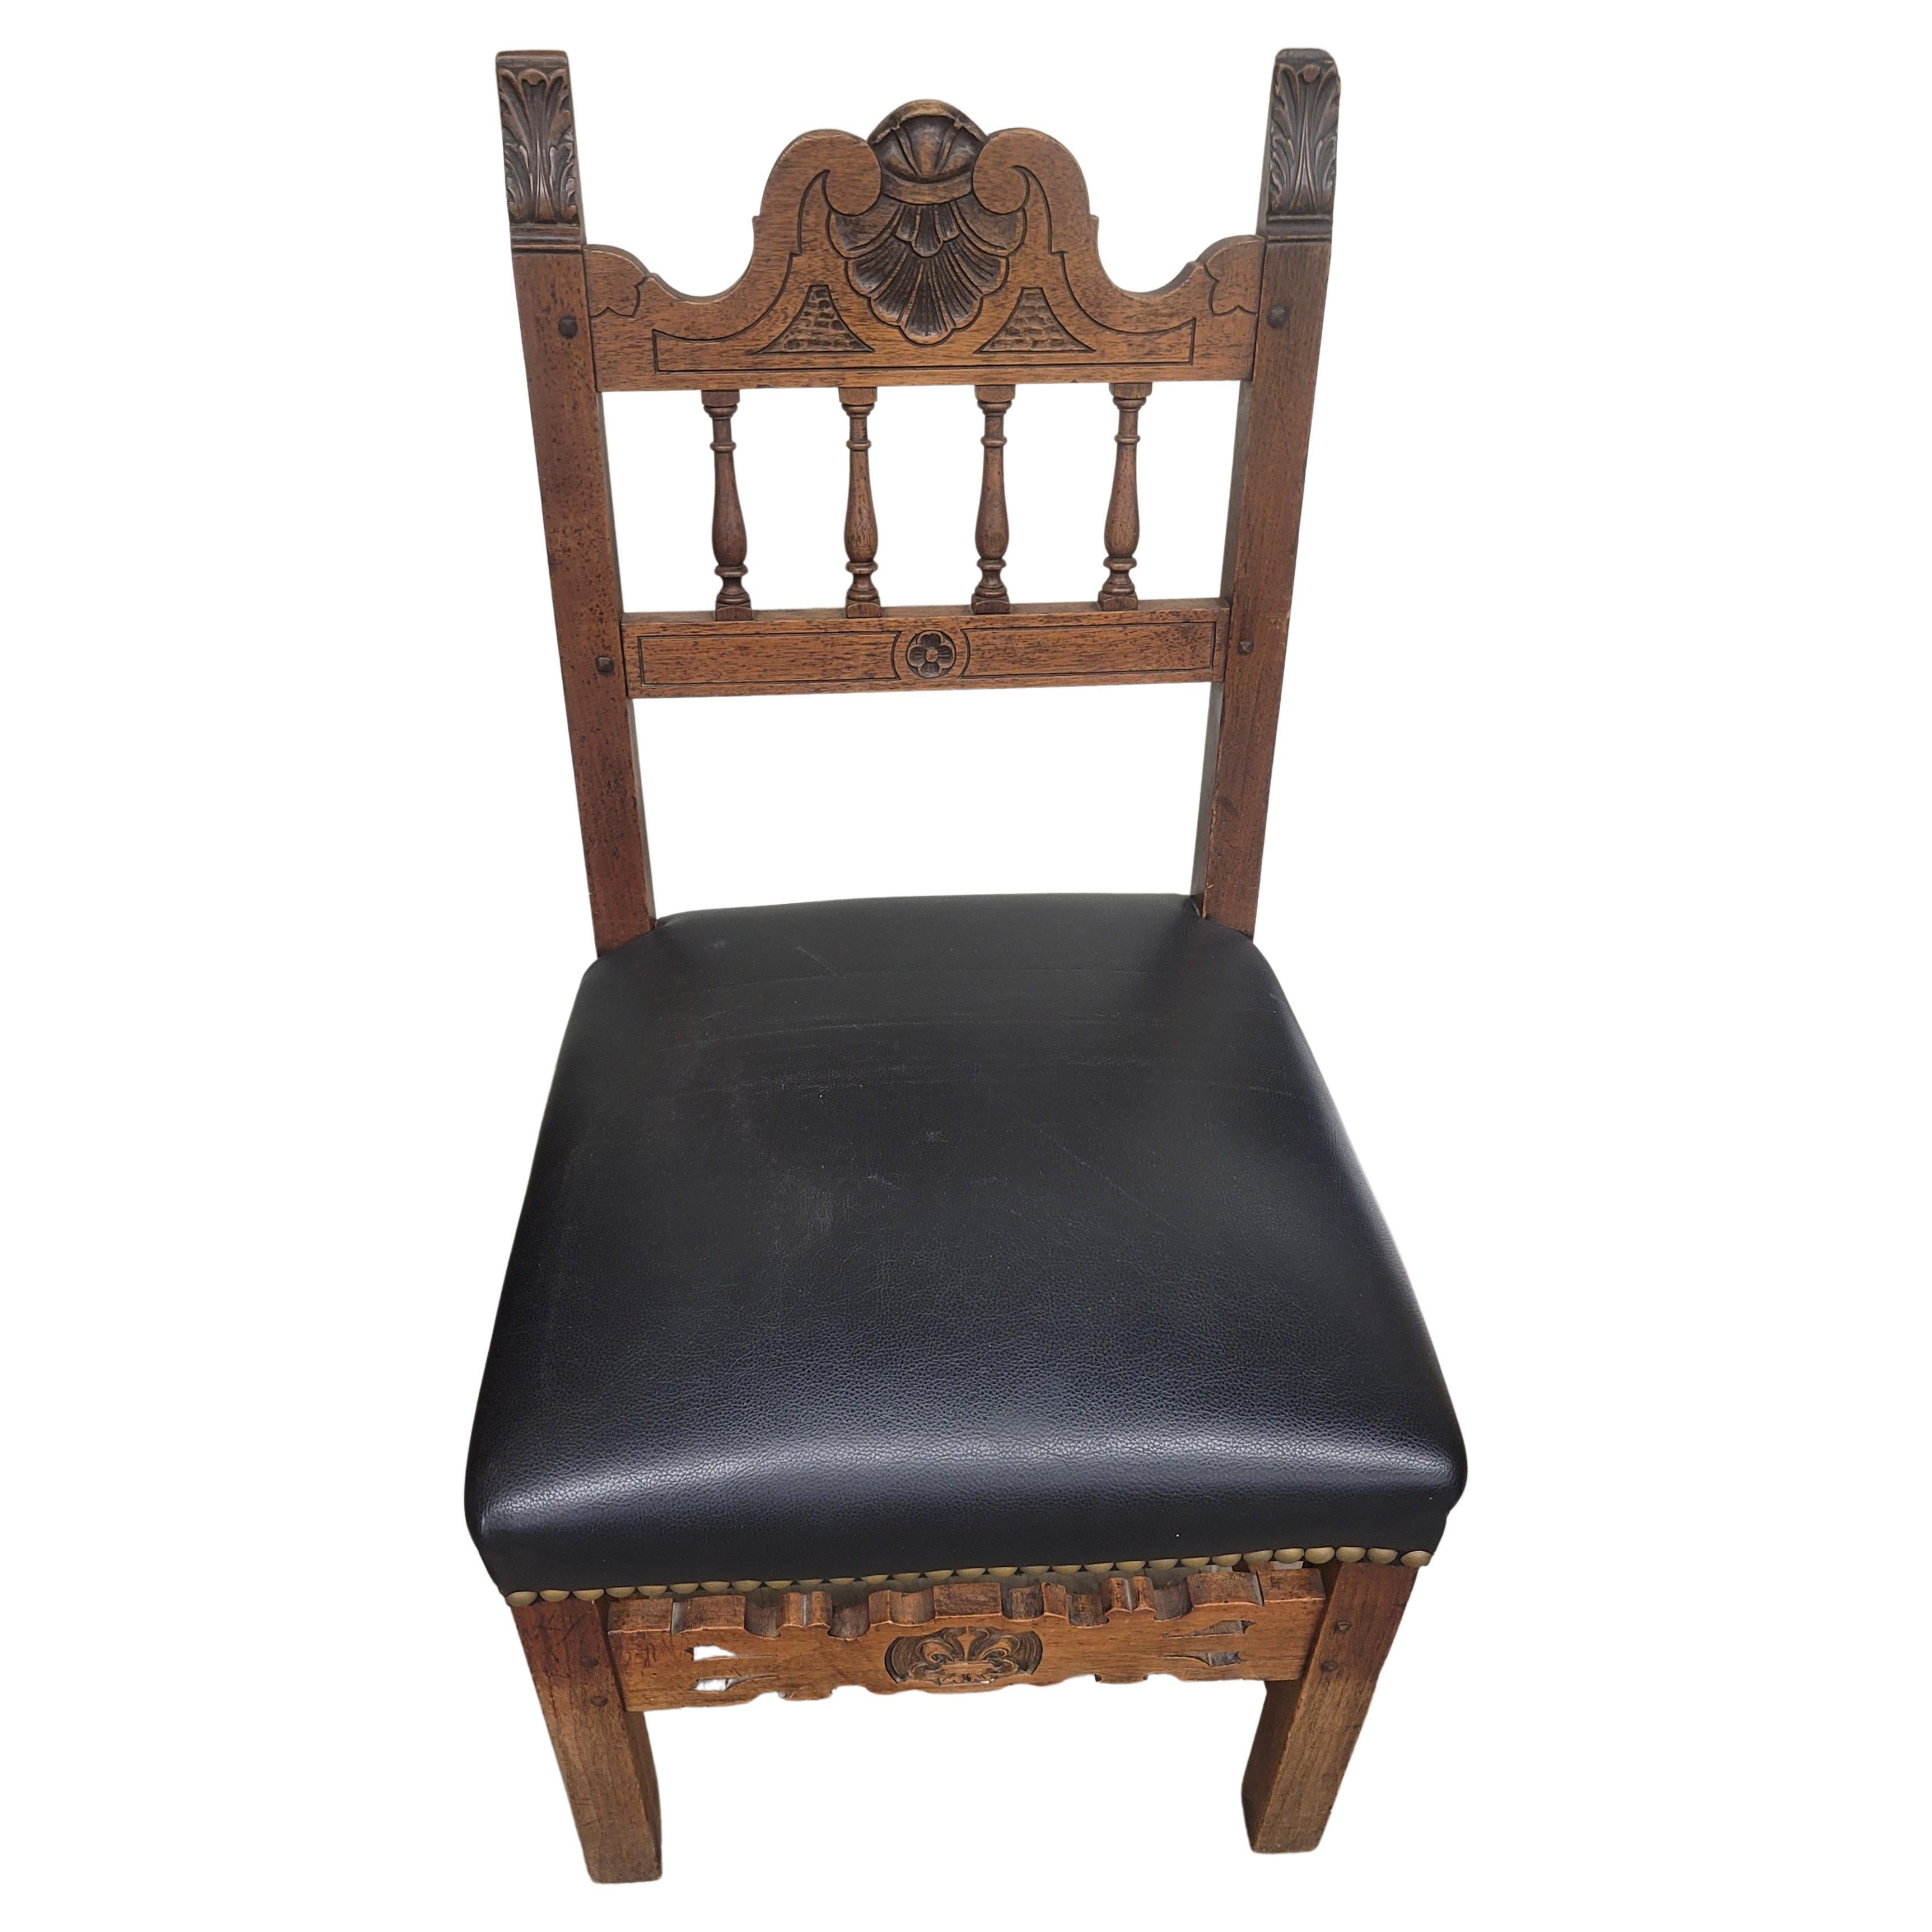 A Baroque style carved wood and leather seat side chair with nail head trims. Newer upholstery in great condition.
Good condition. Measures20